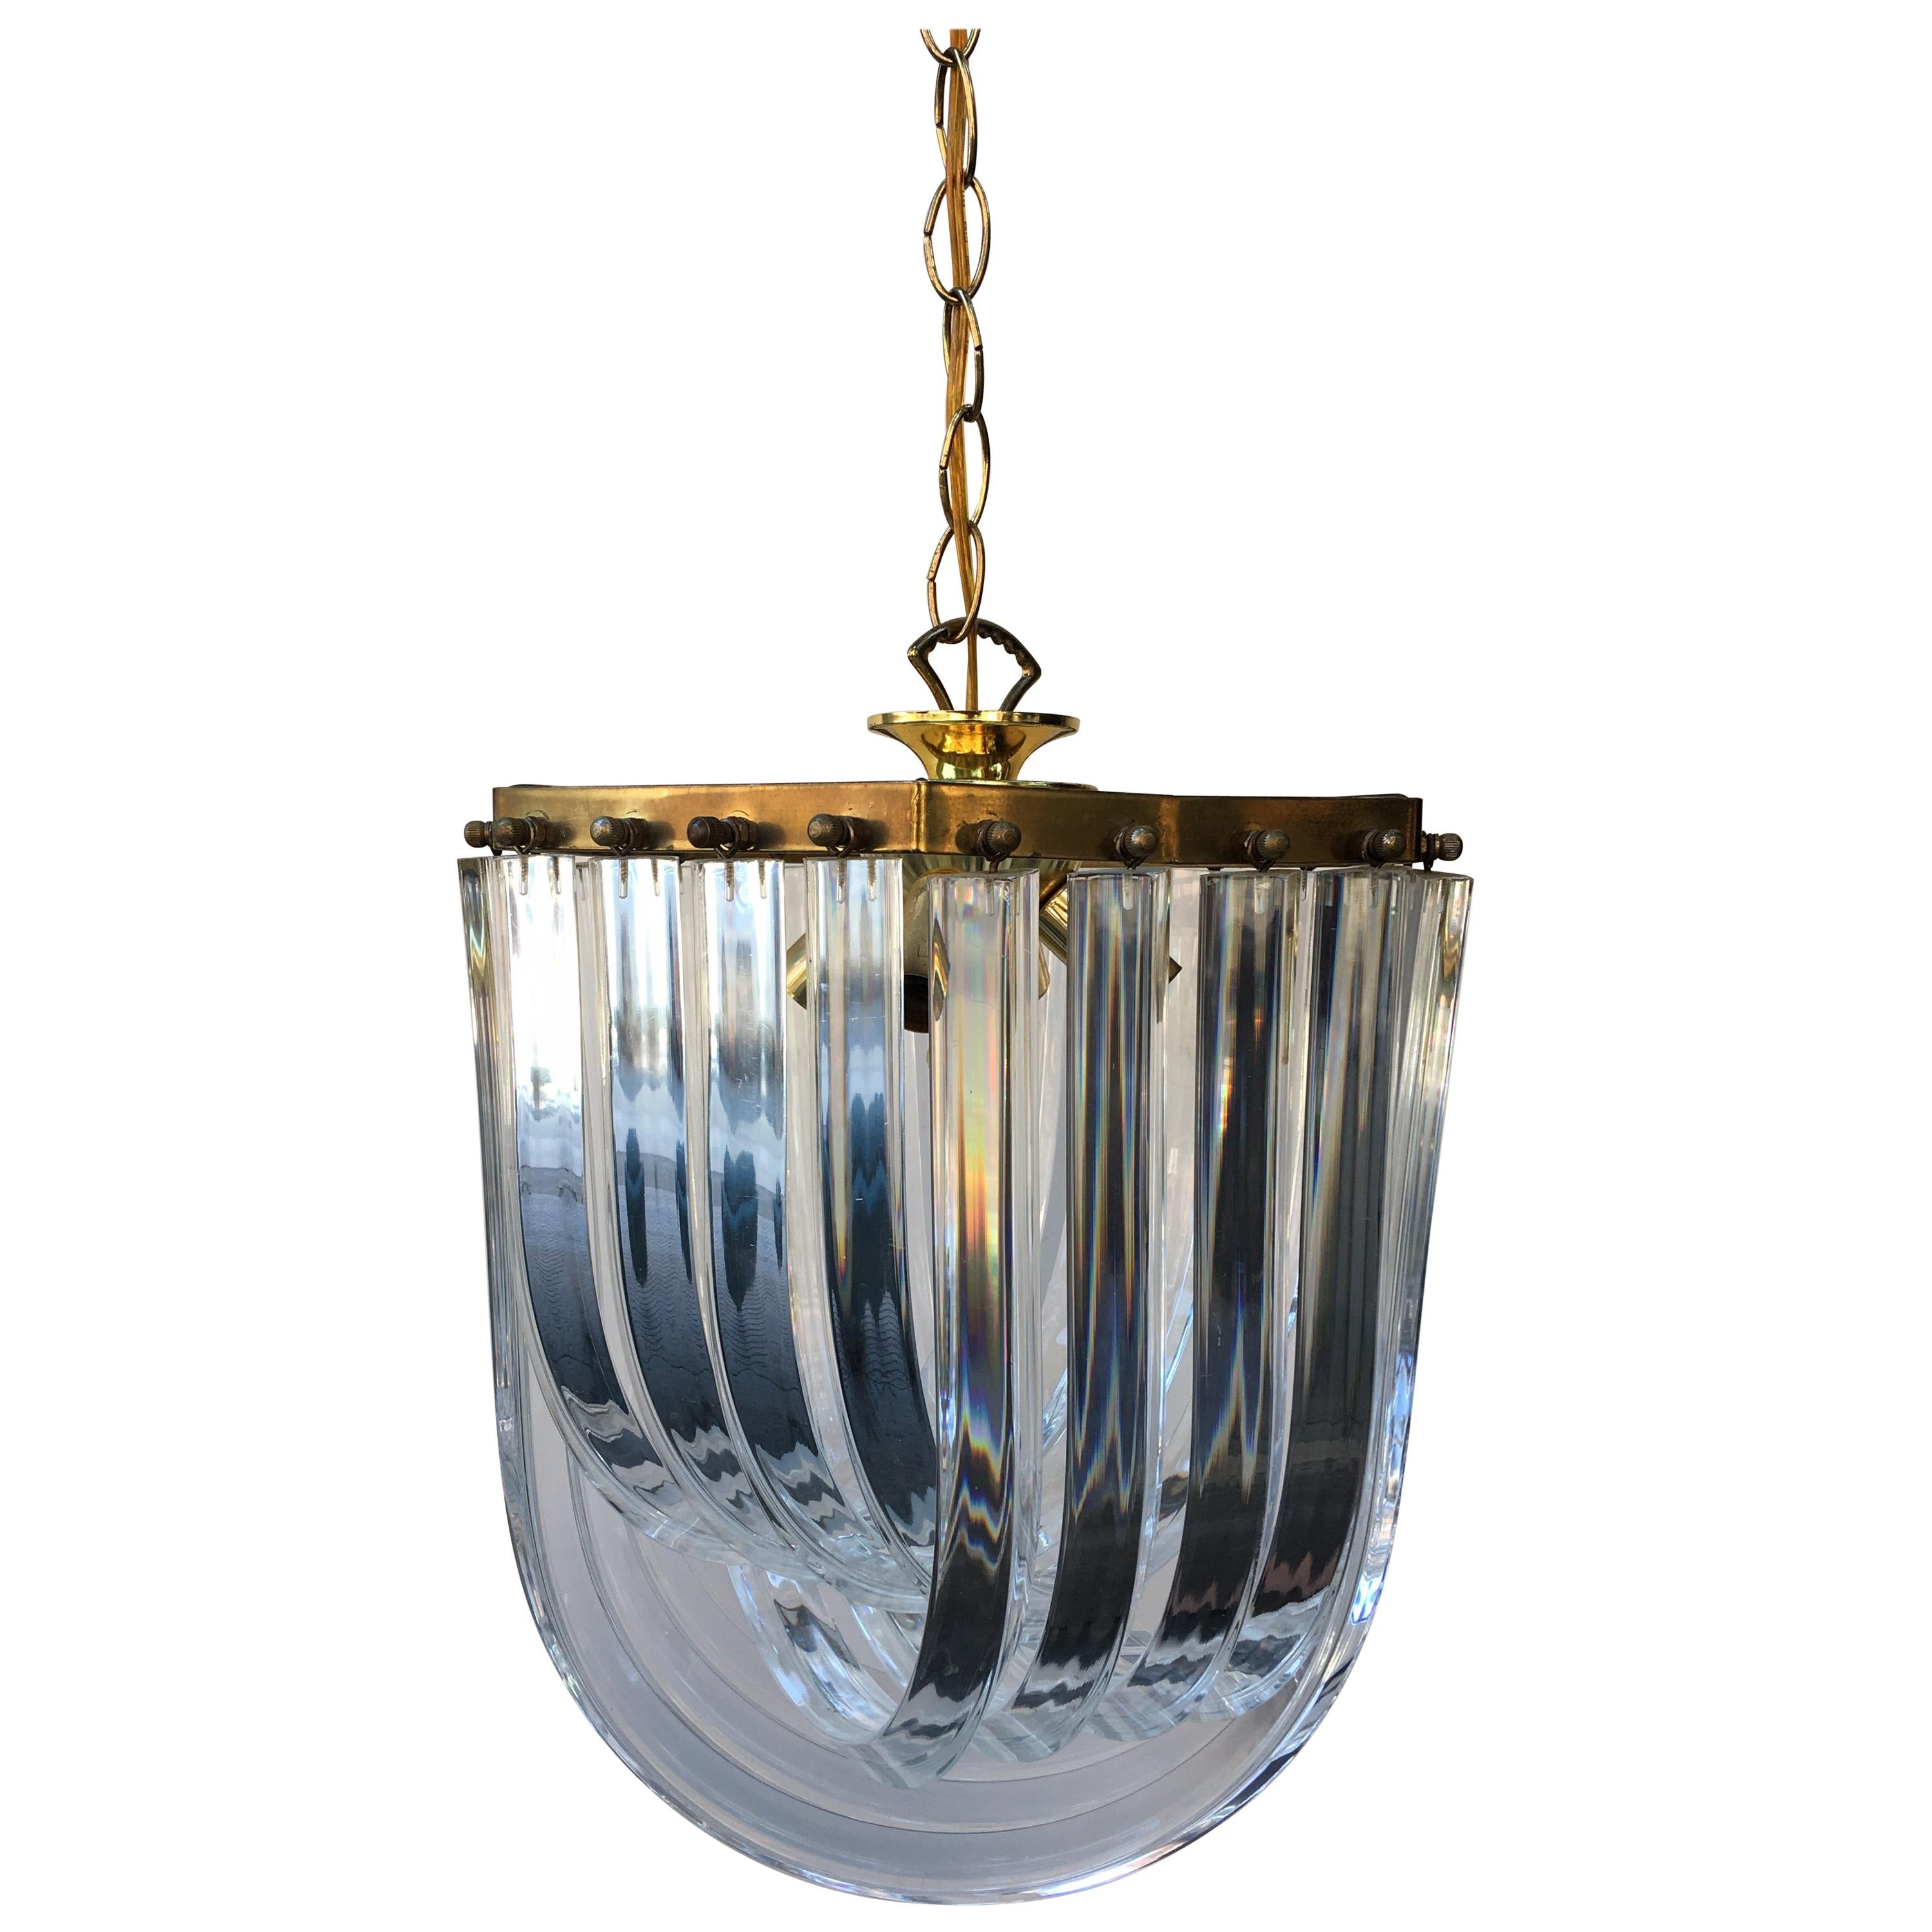 1960s Lucite Cascading Hanging Chandelier Price is for 2!